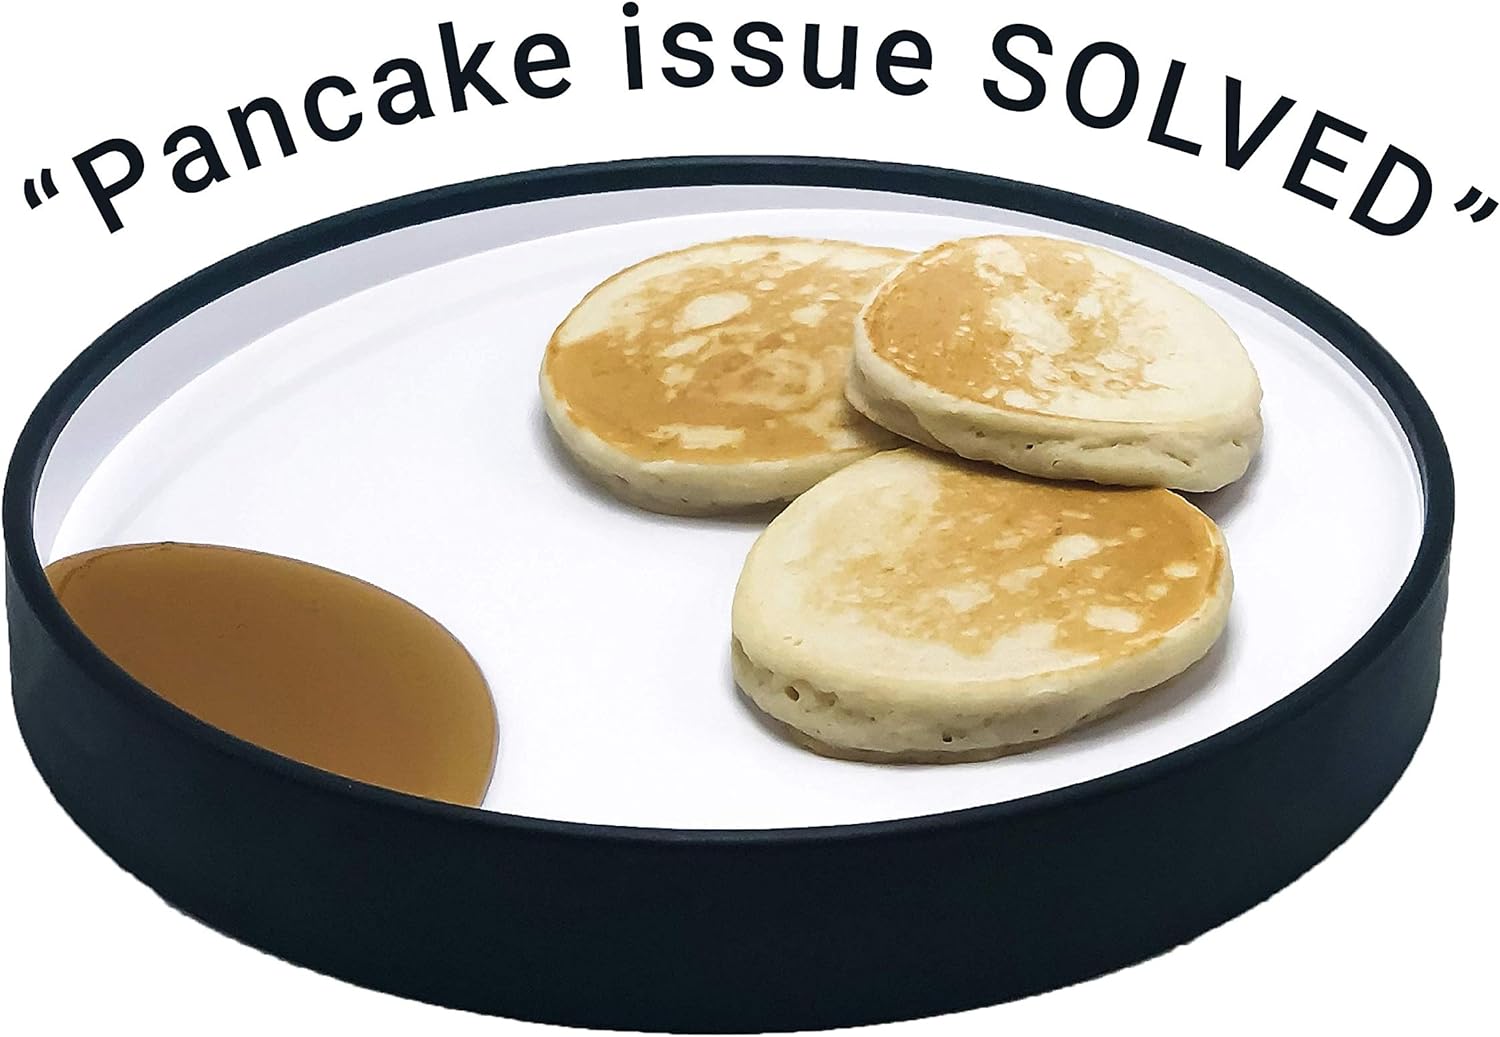 Pancakes shown on plate with syrup separated from the pancakes on the same plate: Non slip, suction, scoop plate for easier eating that's BPA free for adults